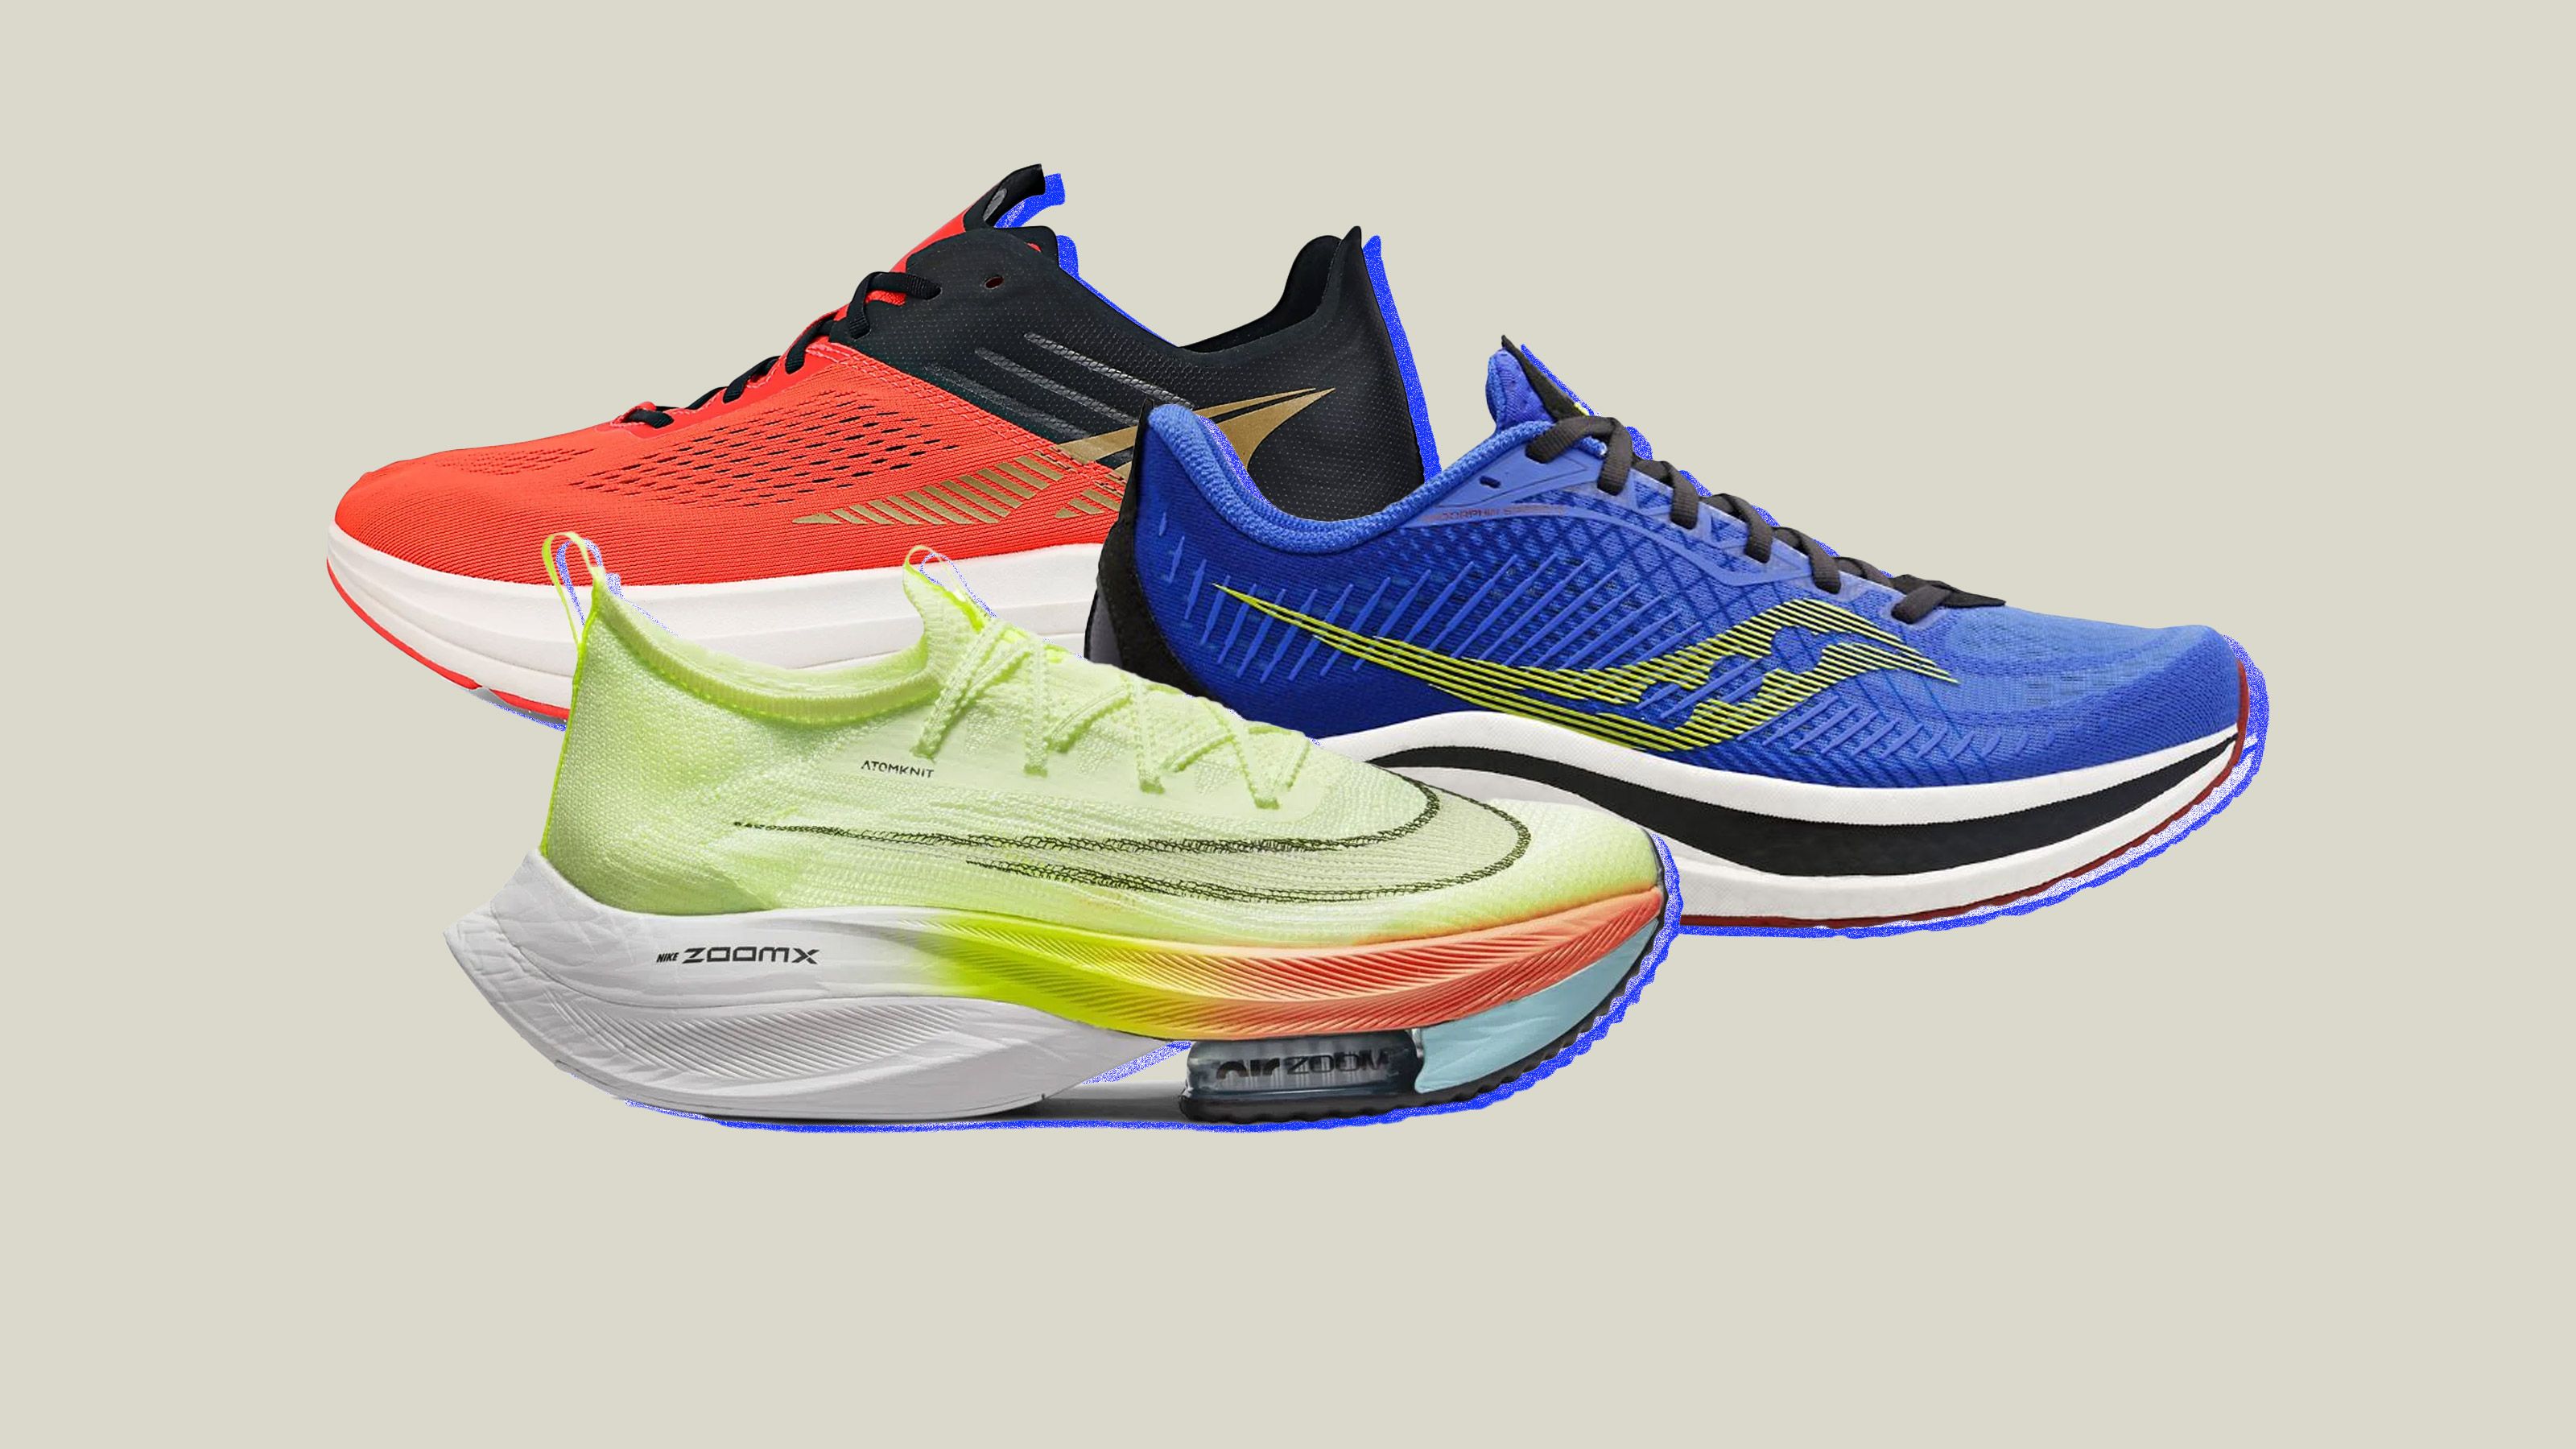 Infidelidad Escritor recurso These Are the Shoes You Need to Run Your Fastest Mile